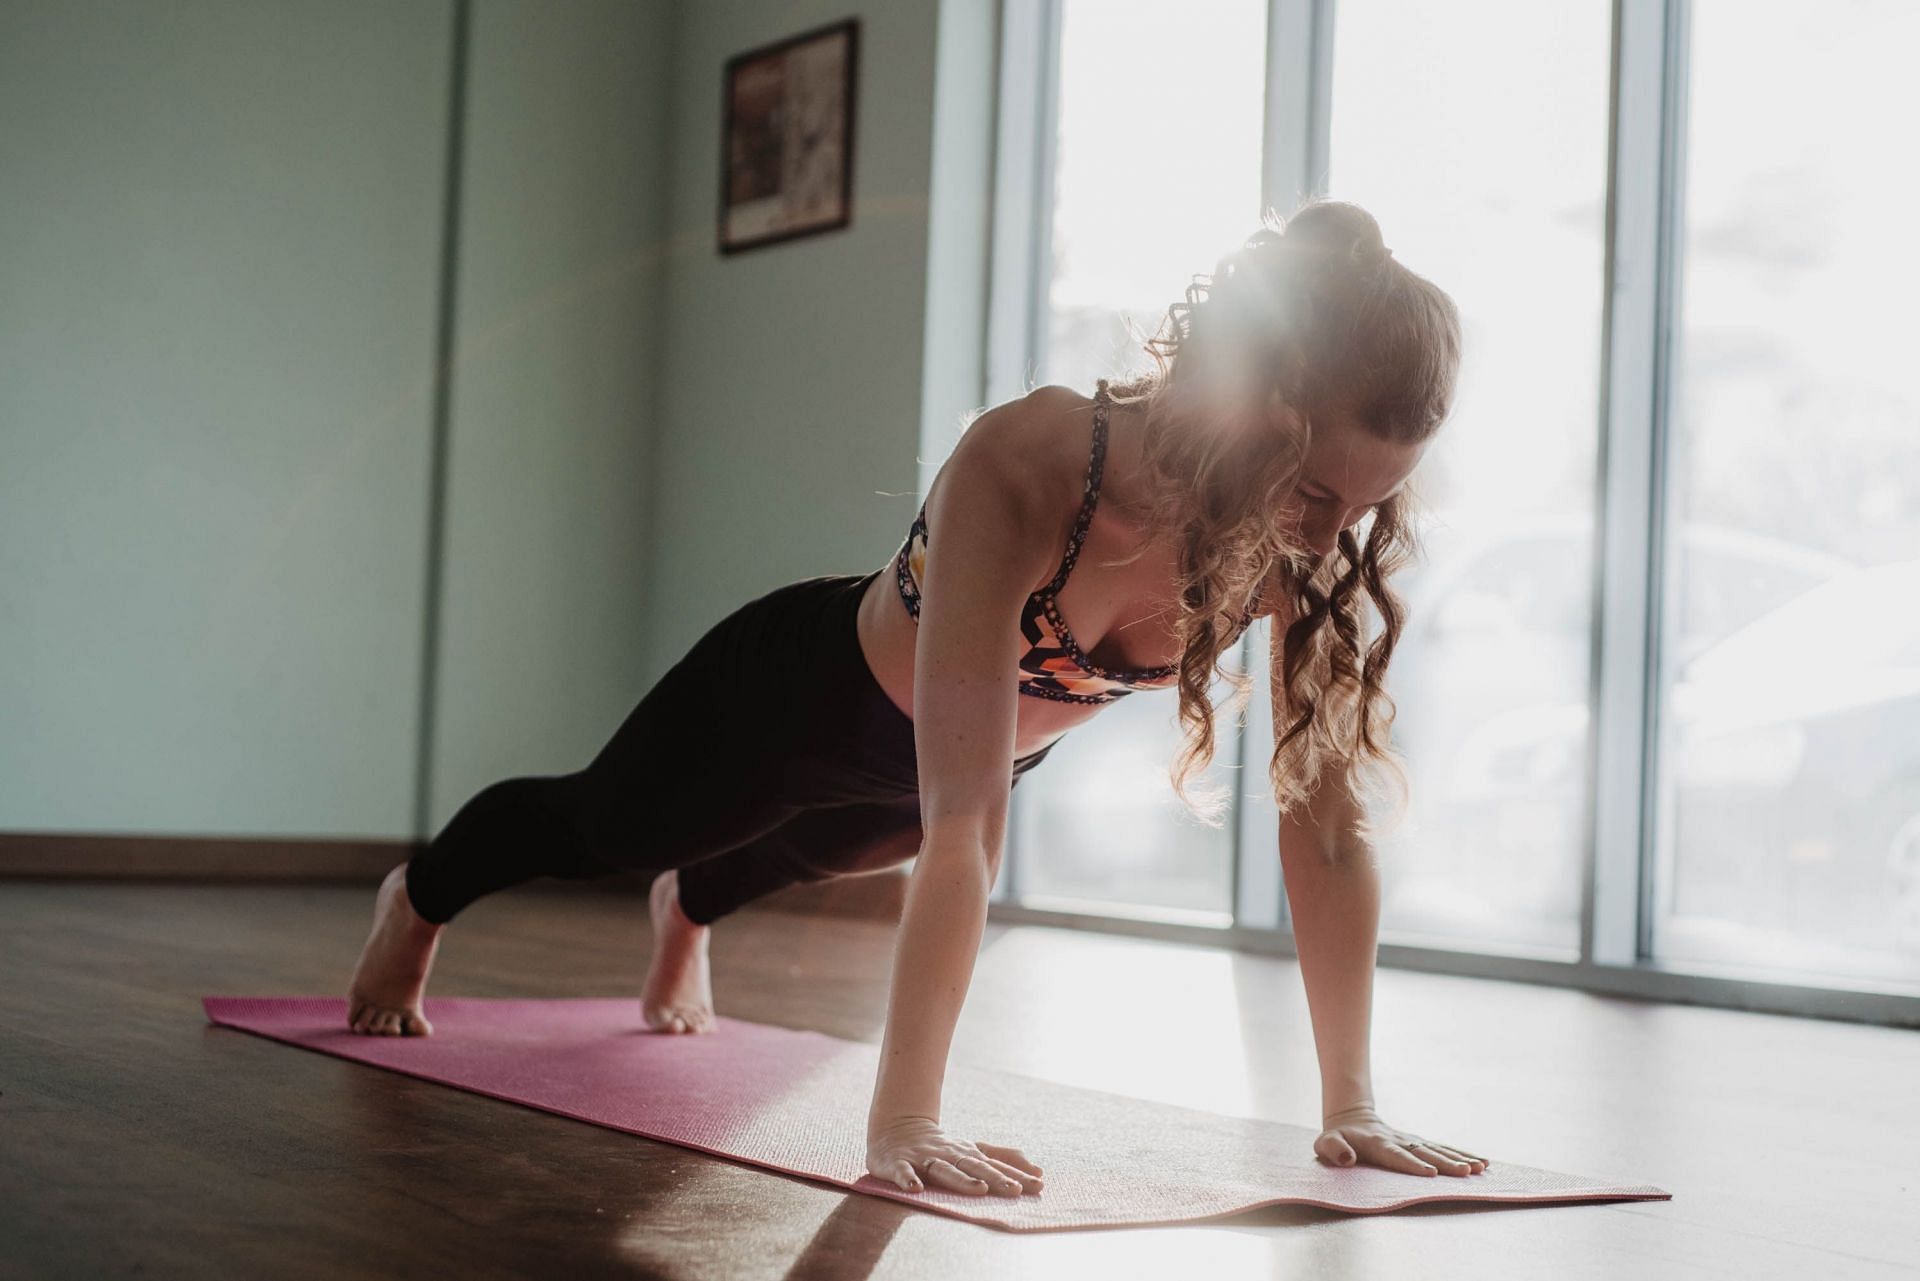 Planks are a great workout for flat stomach! (Image via unsplash/Olivia Bauso)